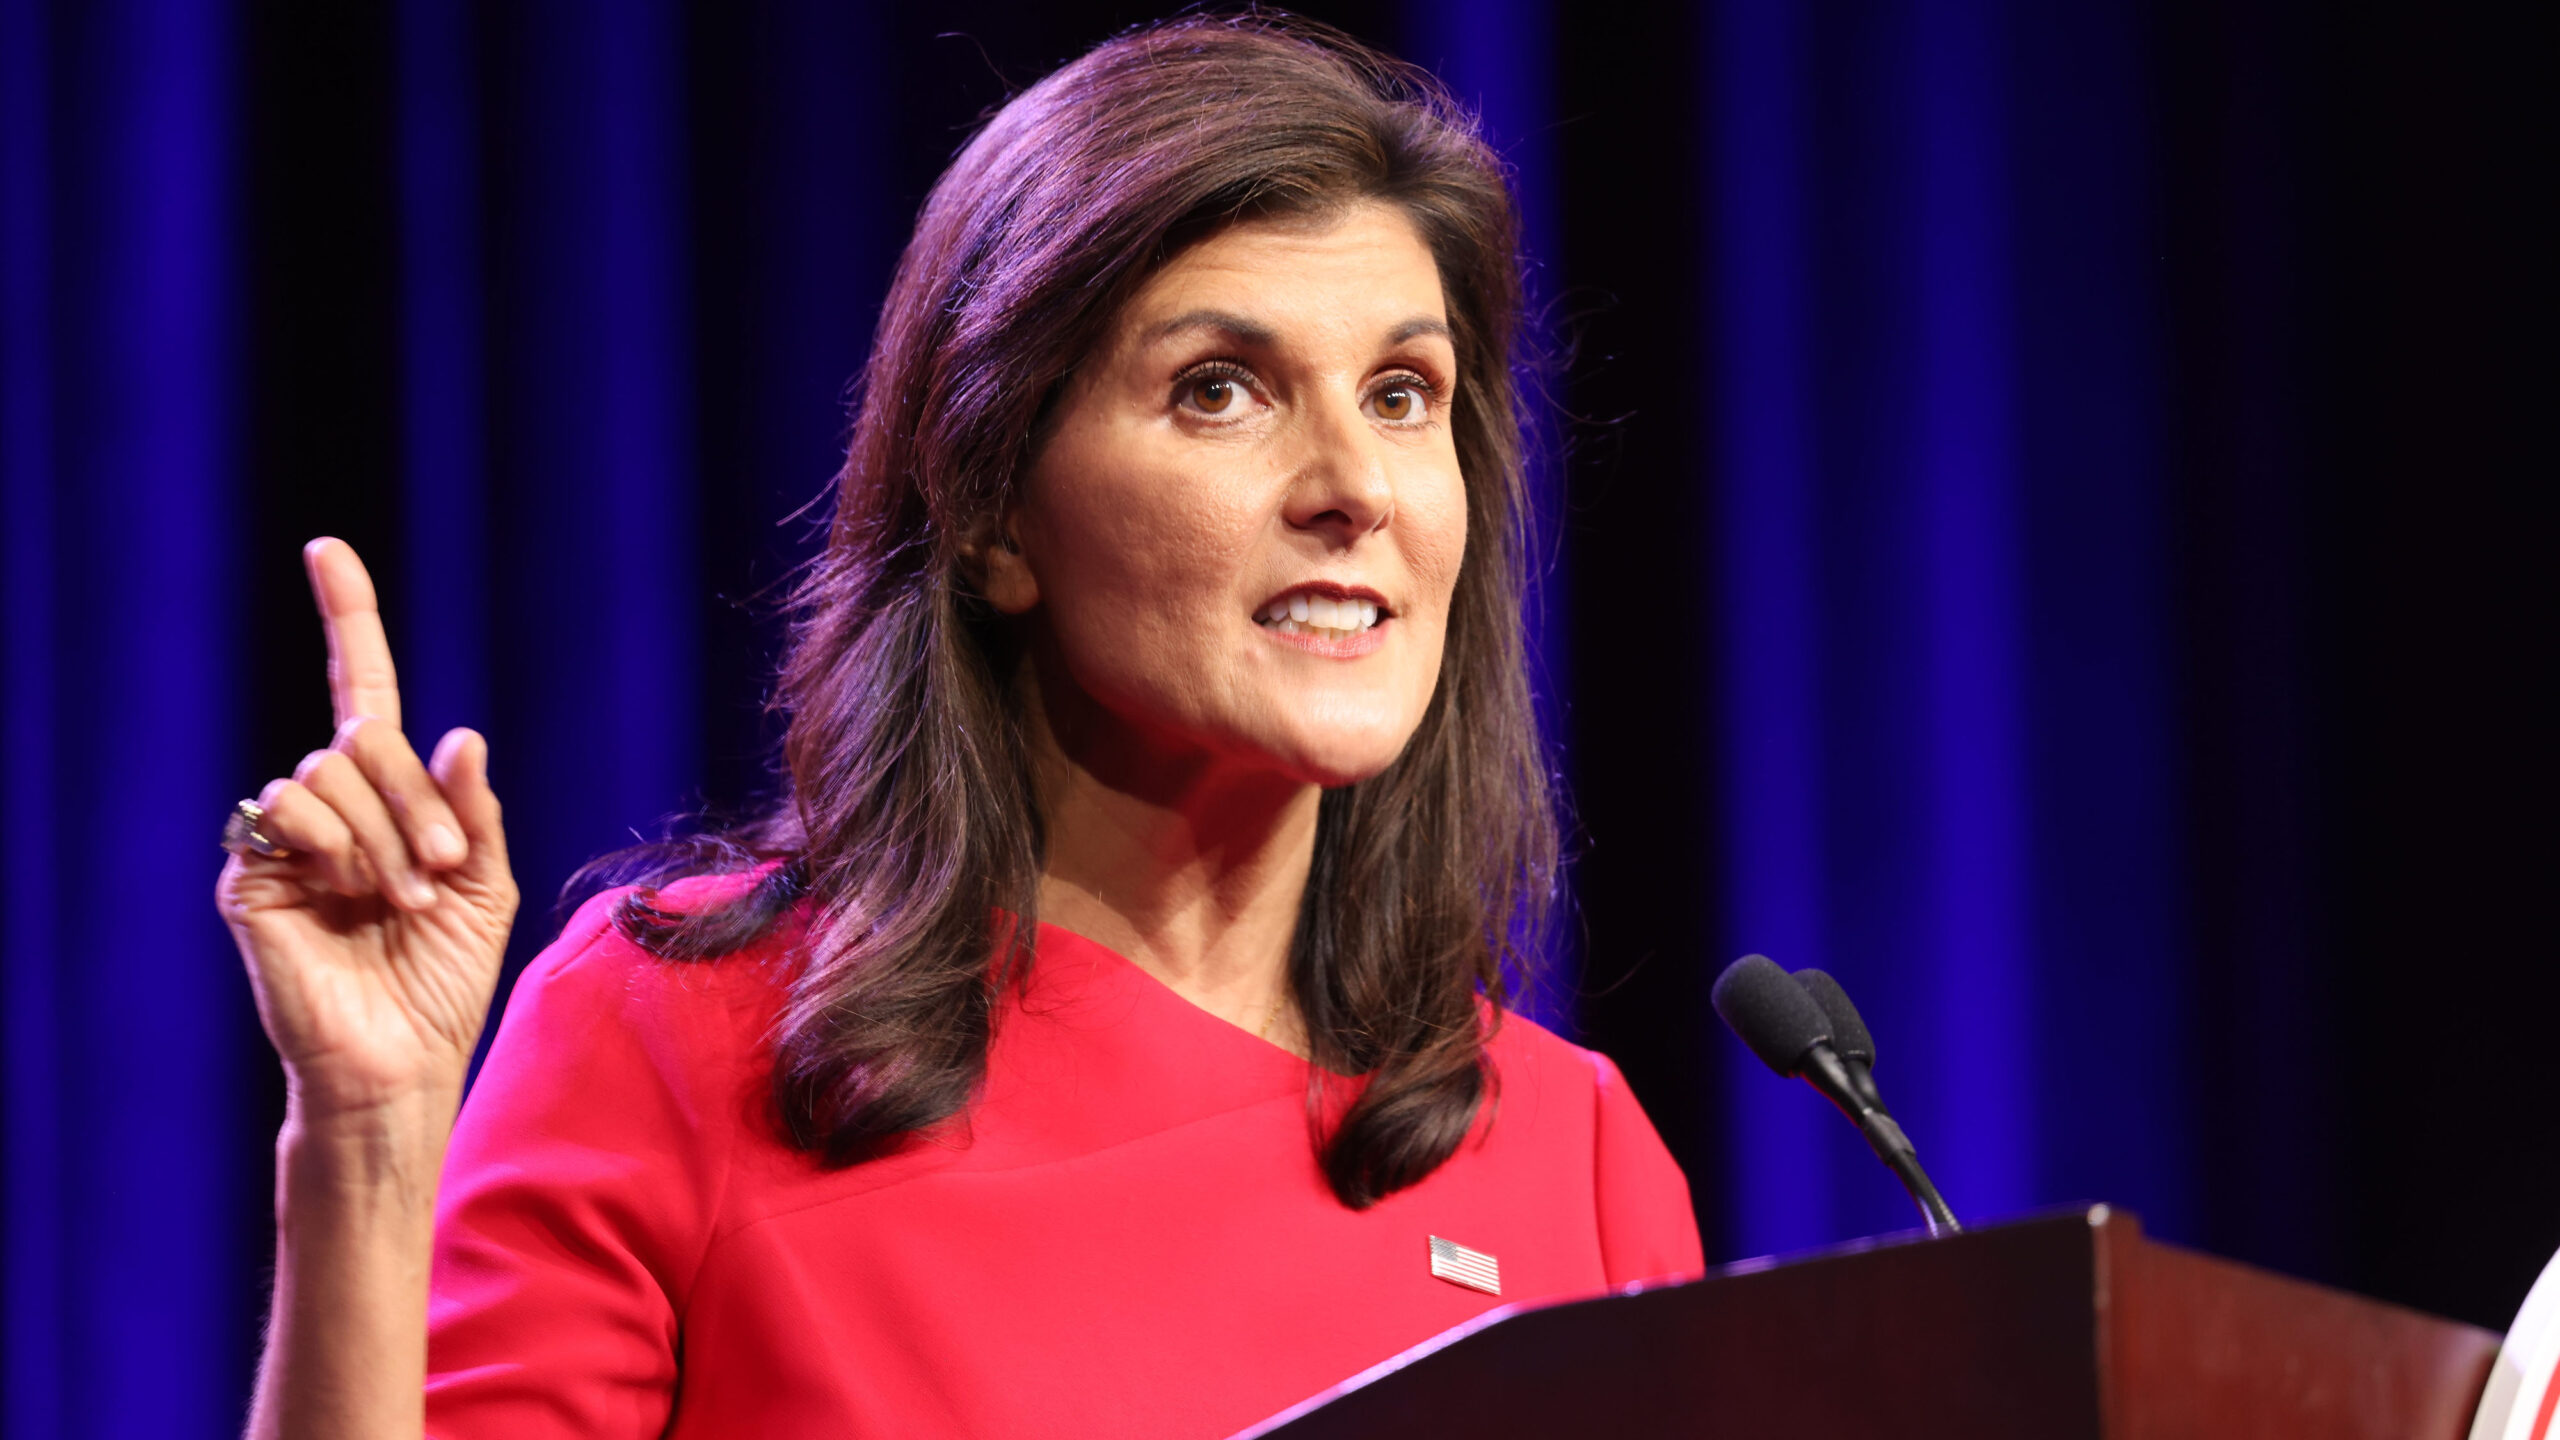 Nikki Haley advocates for ‘mental competency tests’ for politicians over 75.